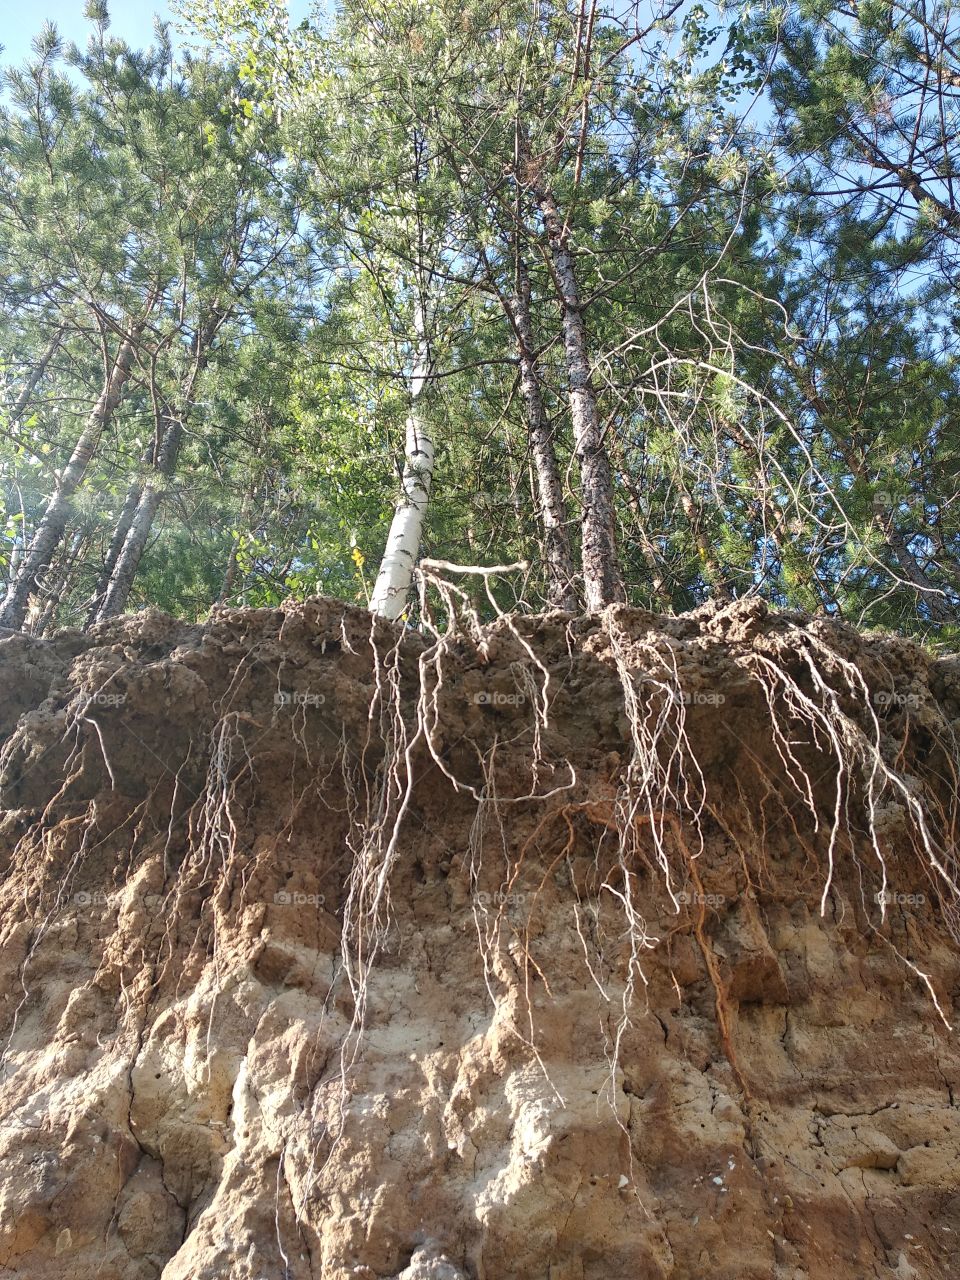 trees (birch, pine) on the edge of a cliff with hanging roots